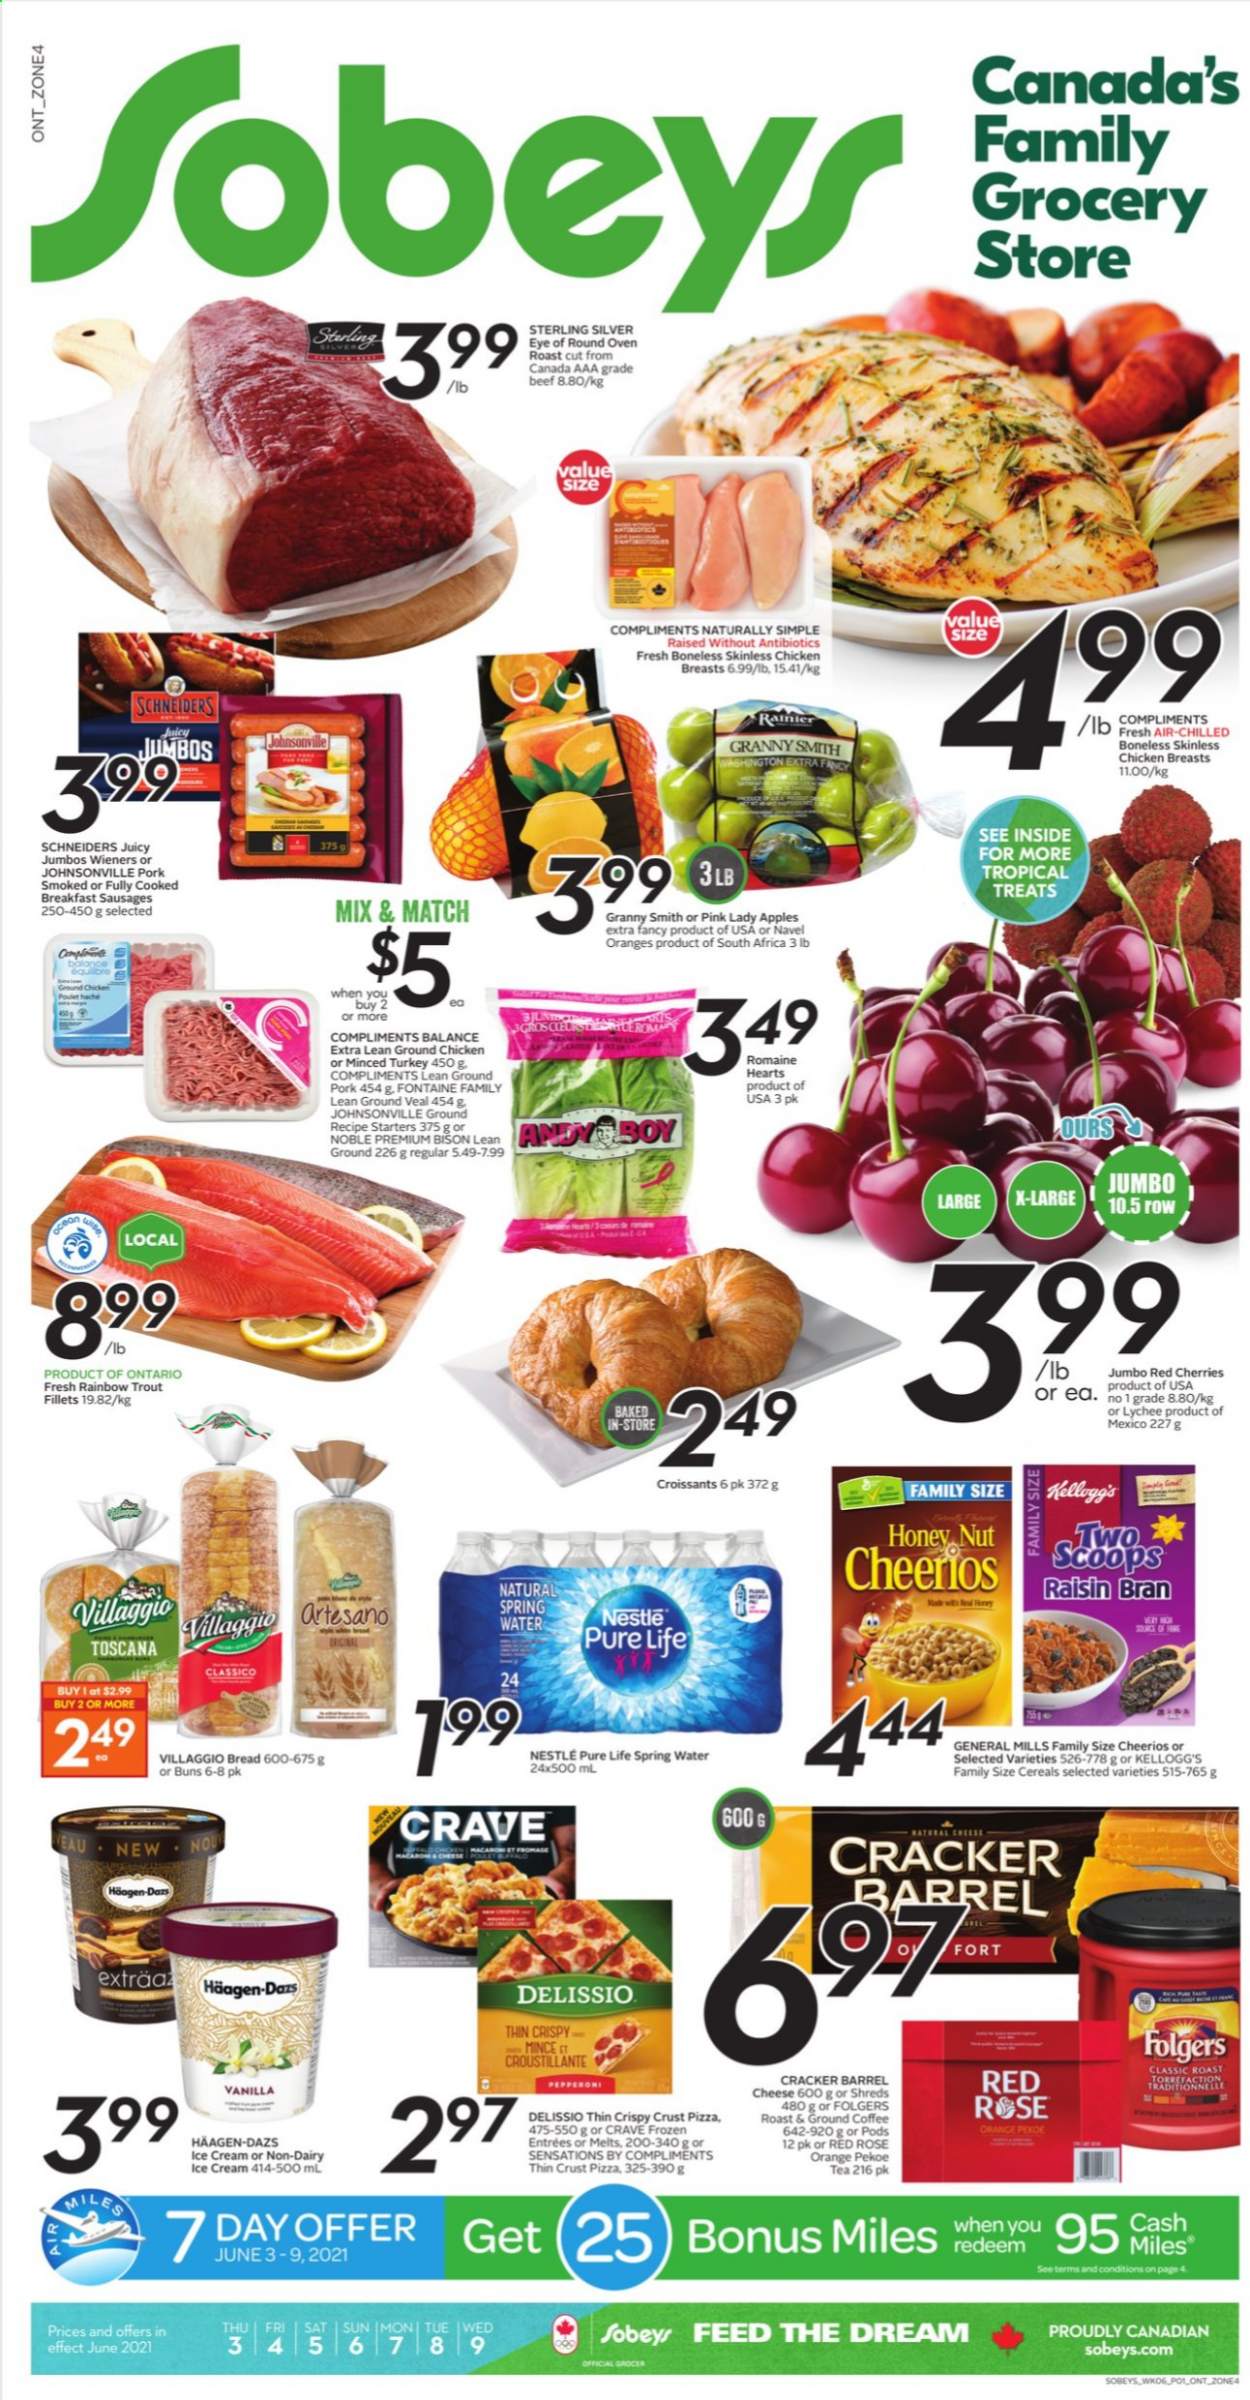 thumbnail - Sobeys Flyer - June 03, 2021 - June 09, 2021 - Sales products - bread, buns, apples, lychee, cherries, Granny Smith, Pink Lady, navel oranges, trout, pizza, Johnsonville, sausage, pepperoni, ice cream, Häagen-Dazs, crackers, Kellogg's, Cheerios, Raisin Bran, Classico, spring water, tea, coffee, Folgers, ground coffee, wine, rosé wine, ground chicken, chicken breasts, chicken, ground veal, veal meat, eye of round, ground pork, Nestlé. Page 1.